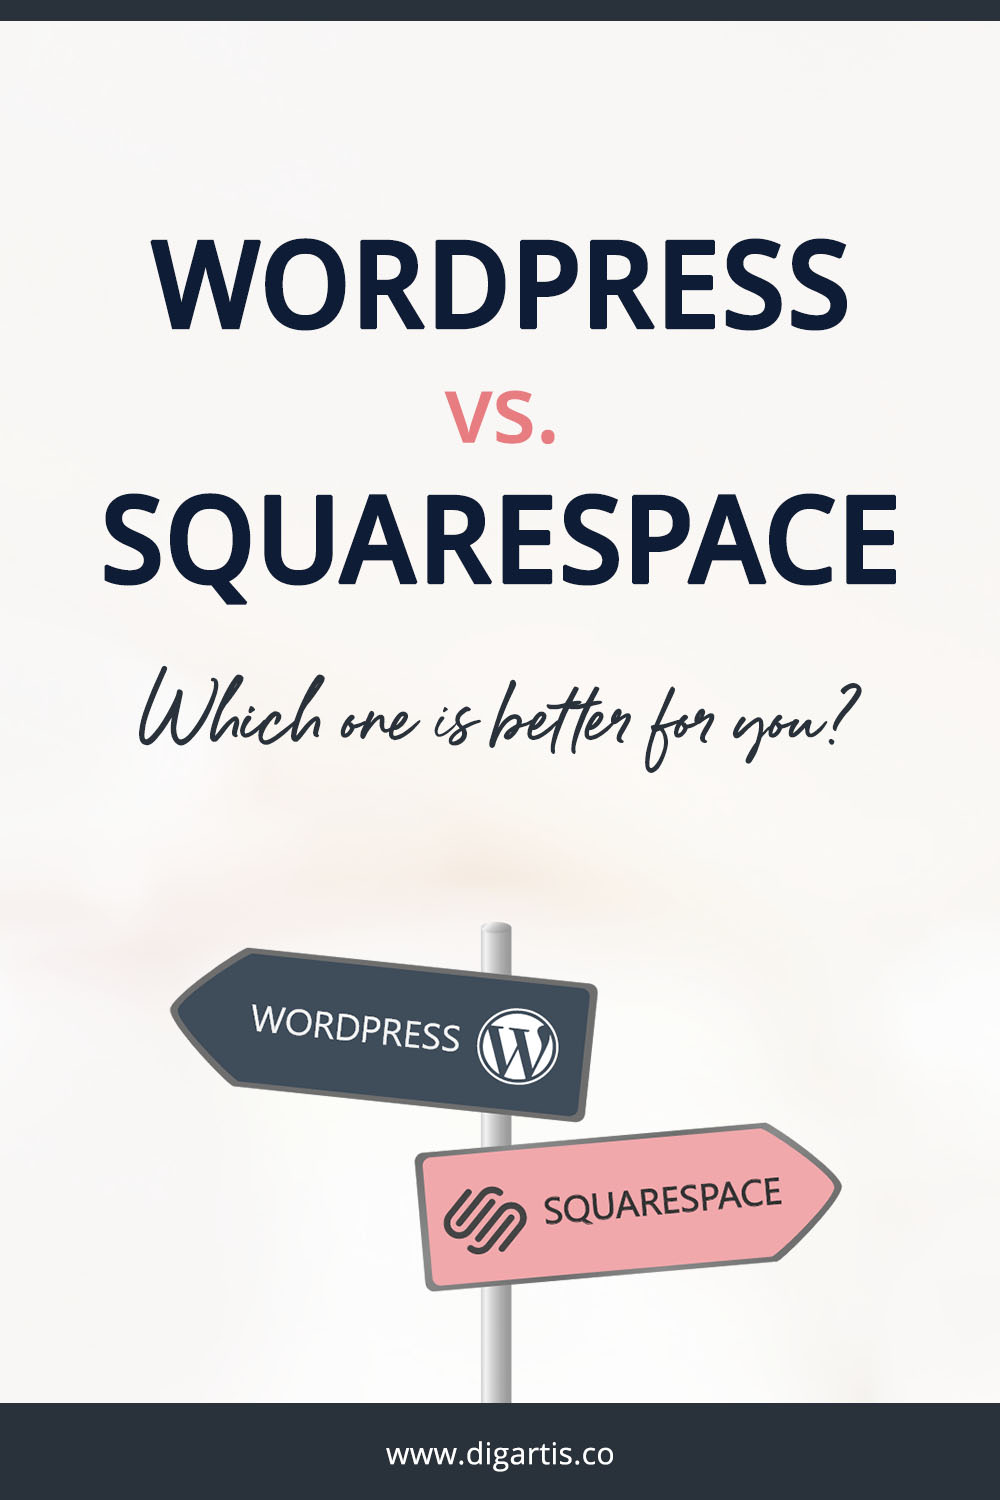 WordPress vs. Squarespace: Which one’s better for you?